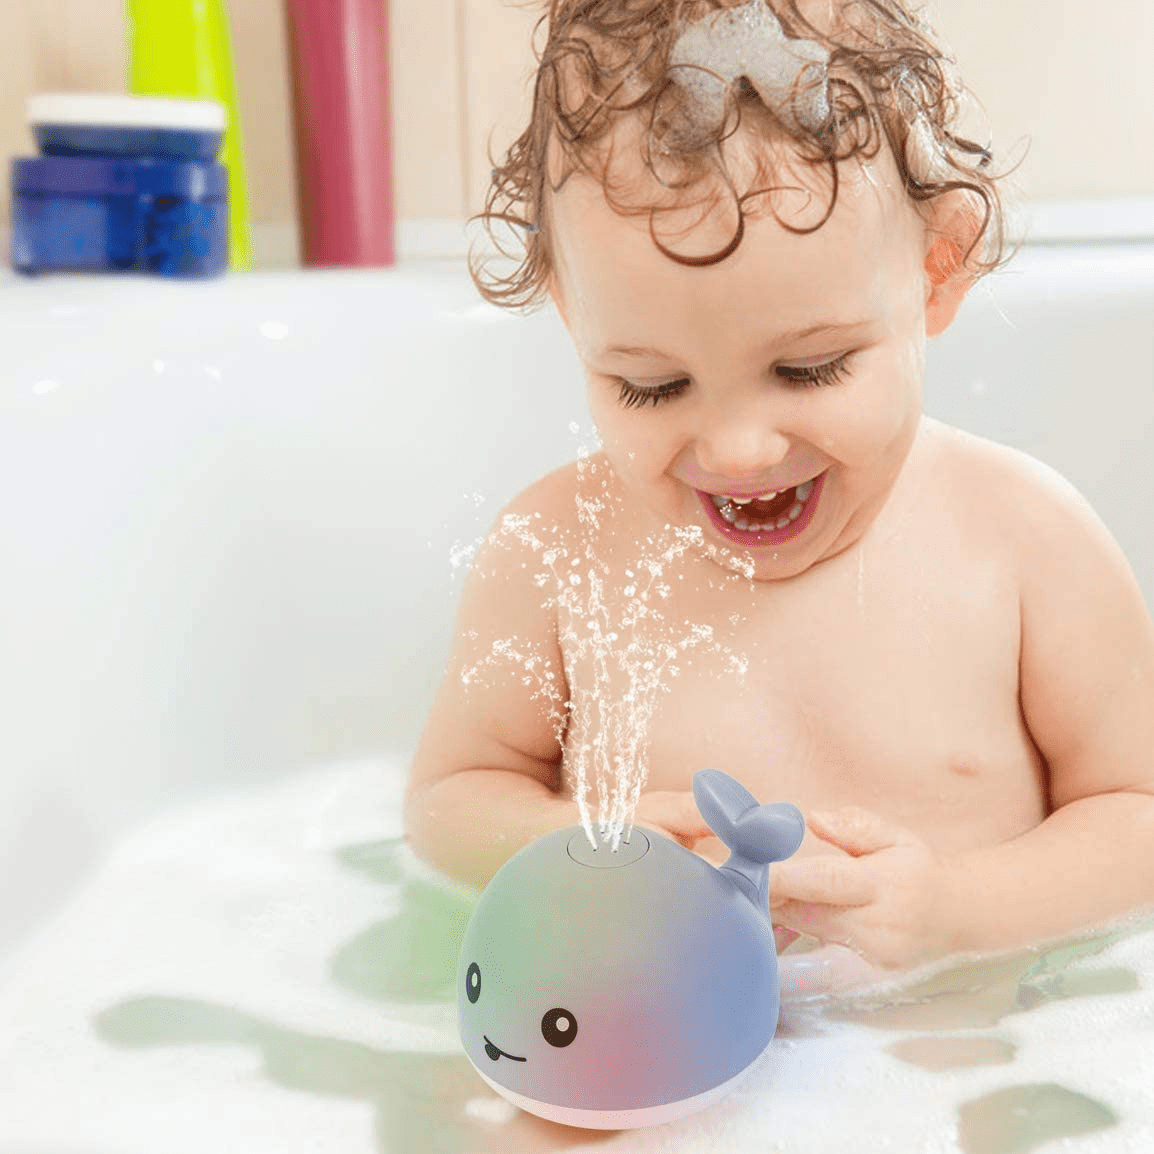 Baby Bath Toys Sprinkler Bathtub Toys for Toddlers Automatic Spray Water Light Up Bath Toy for Kids Baby Shower Pool Bathroom Toy for Boys Girls Birthday Gift Induction Crocodile with 5 Fountain Modes 